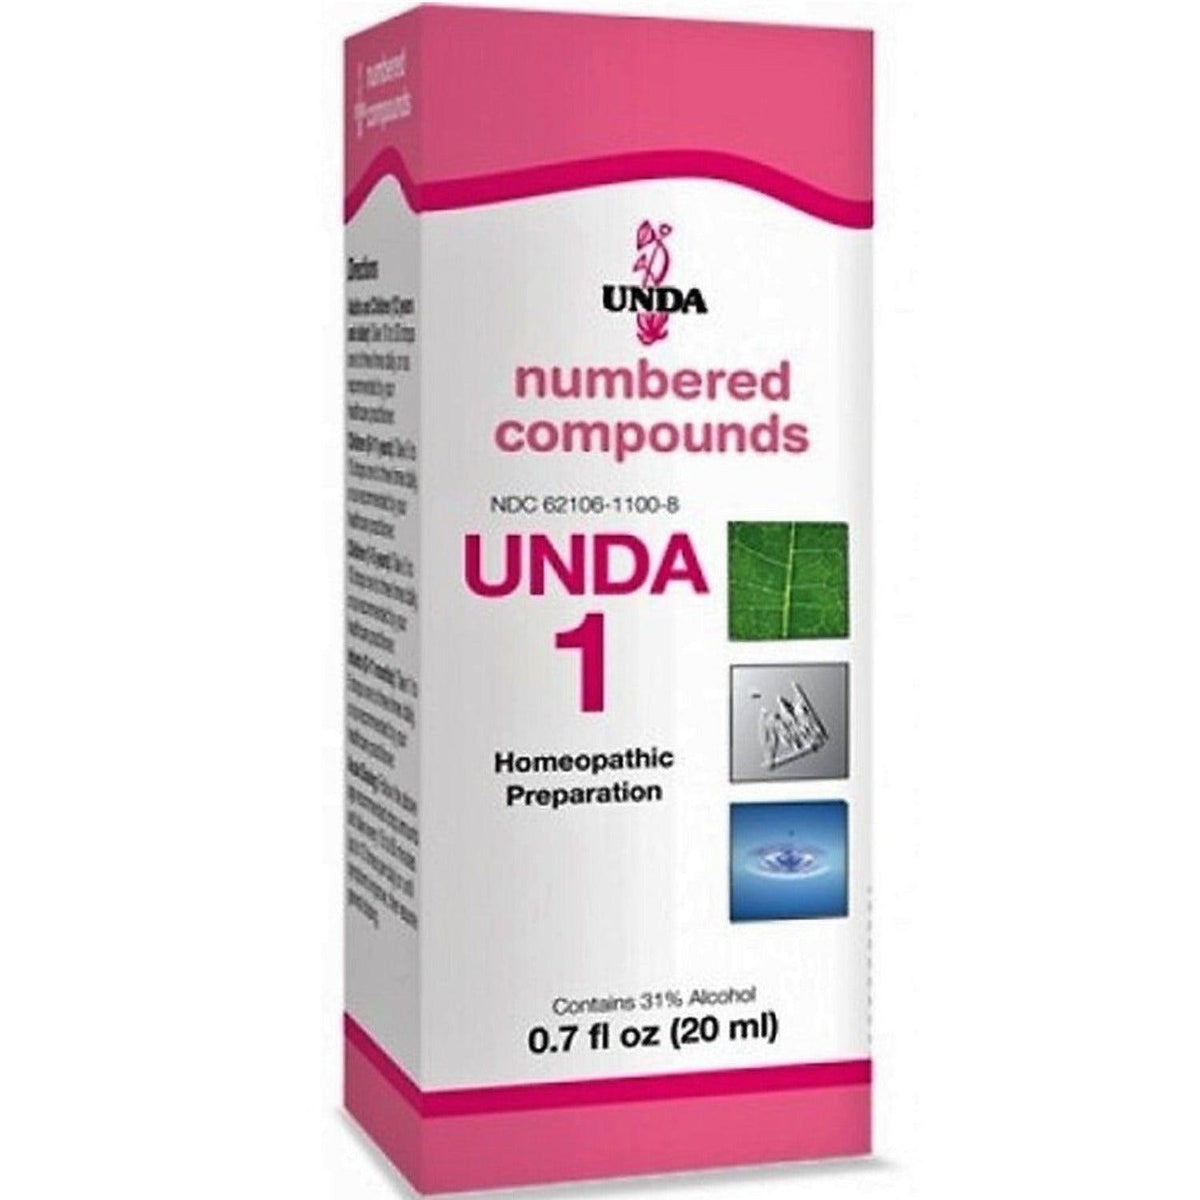 UNDA Numbered Compounds #1 Homeopathic at Village Vitamin Store